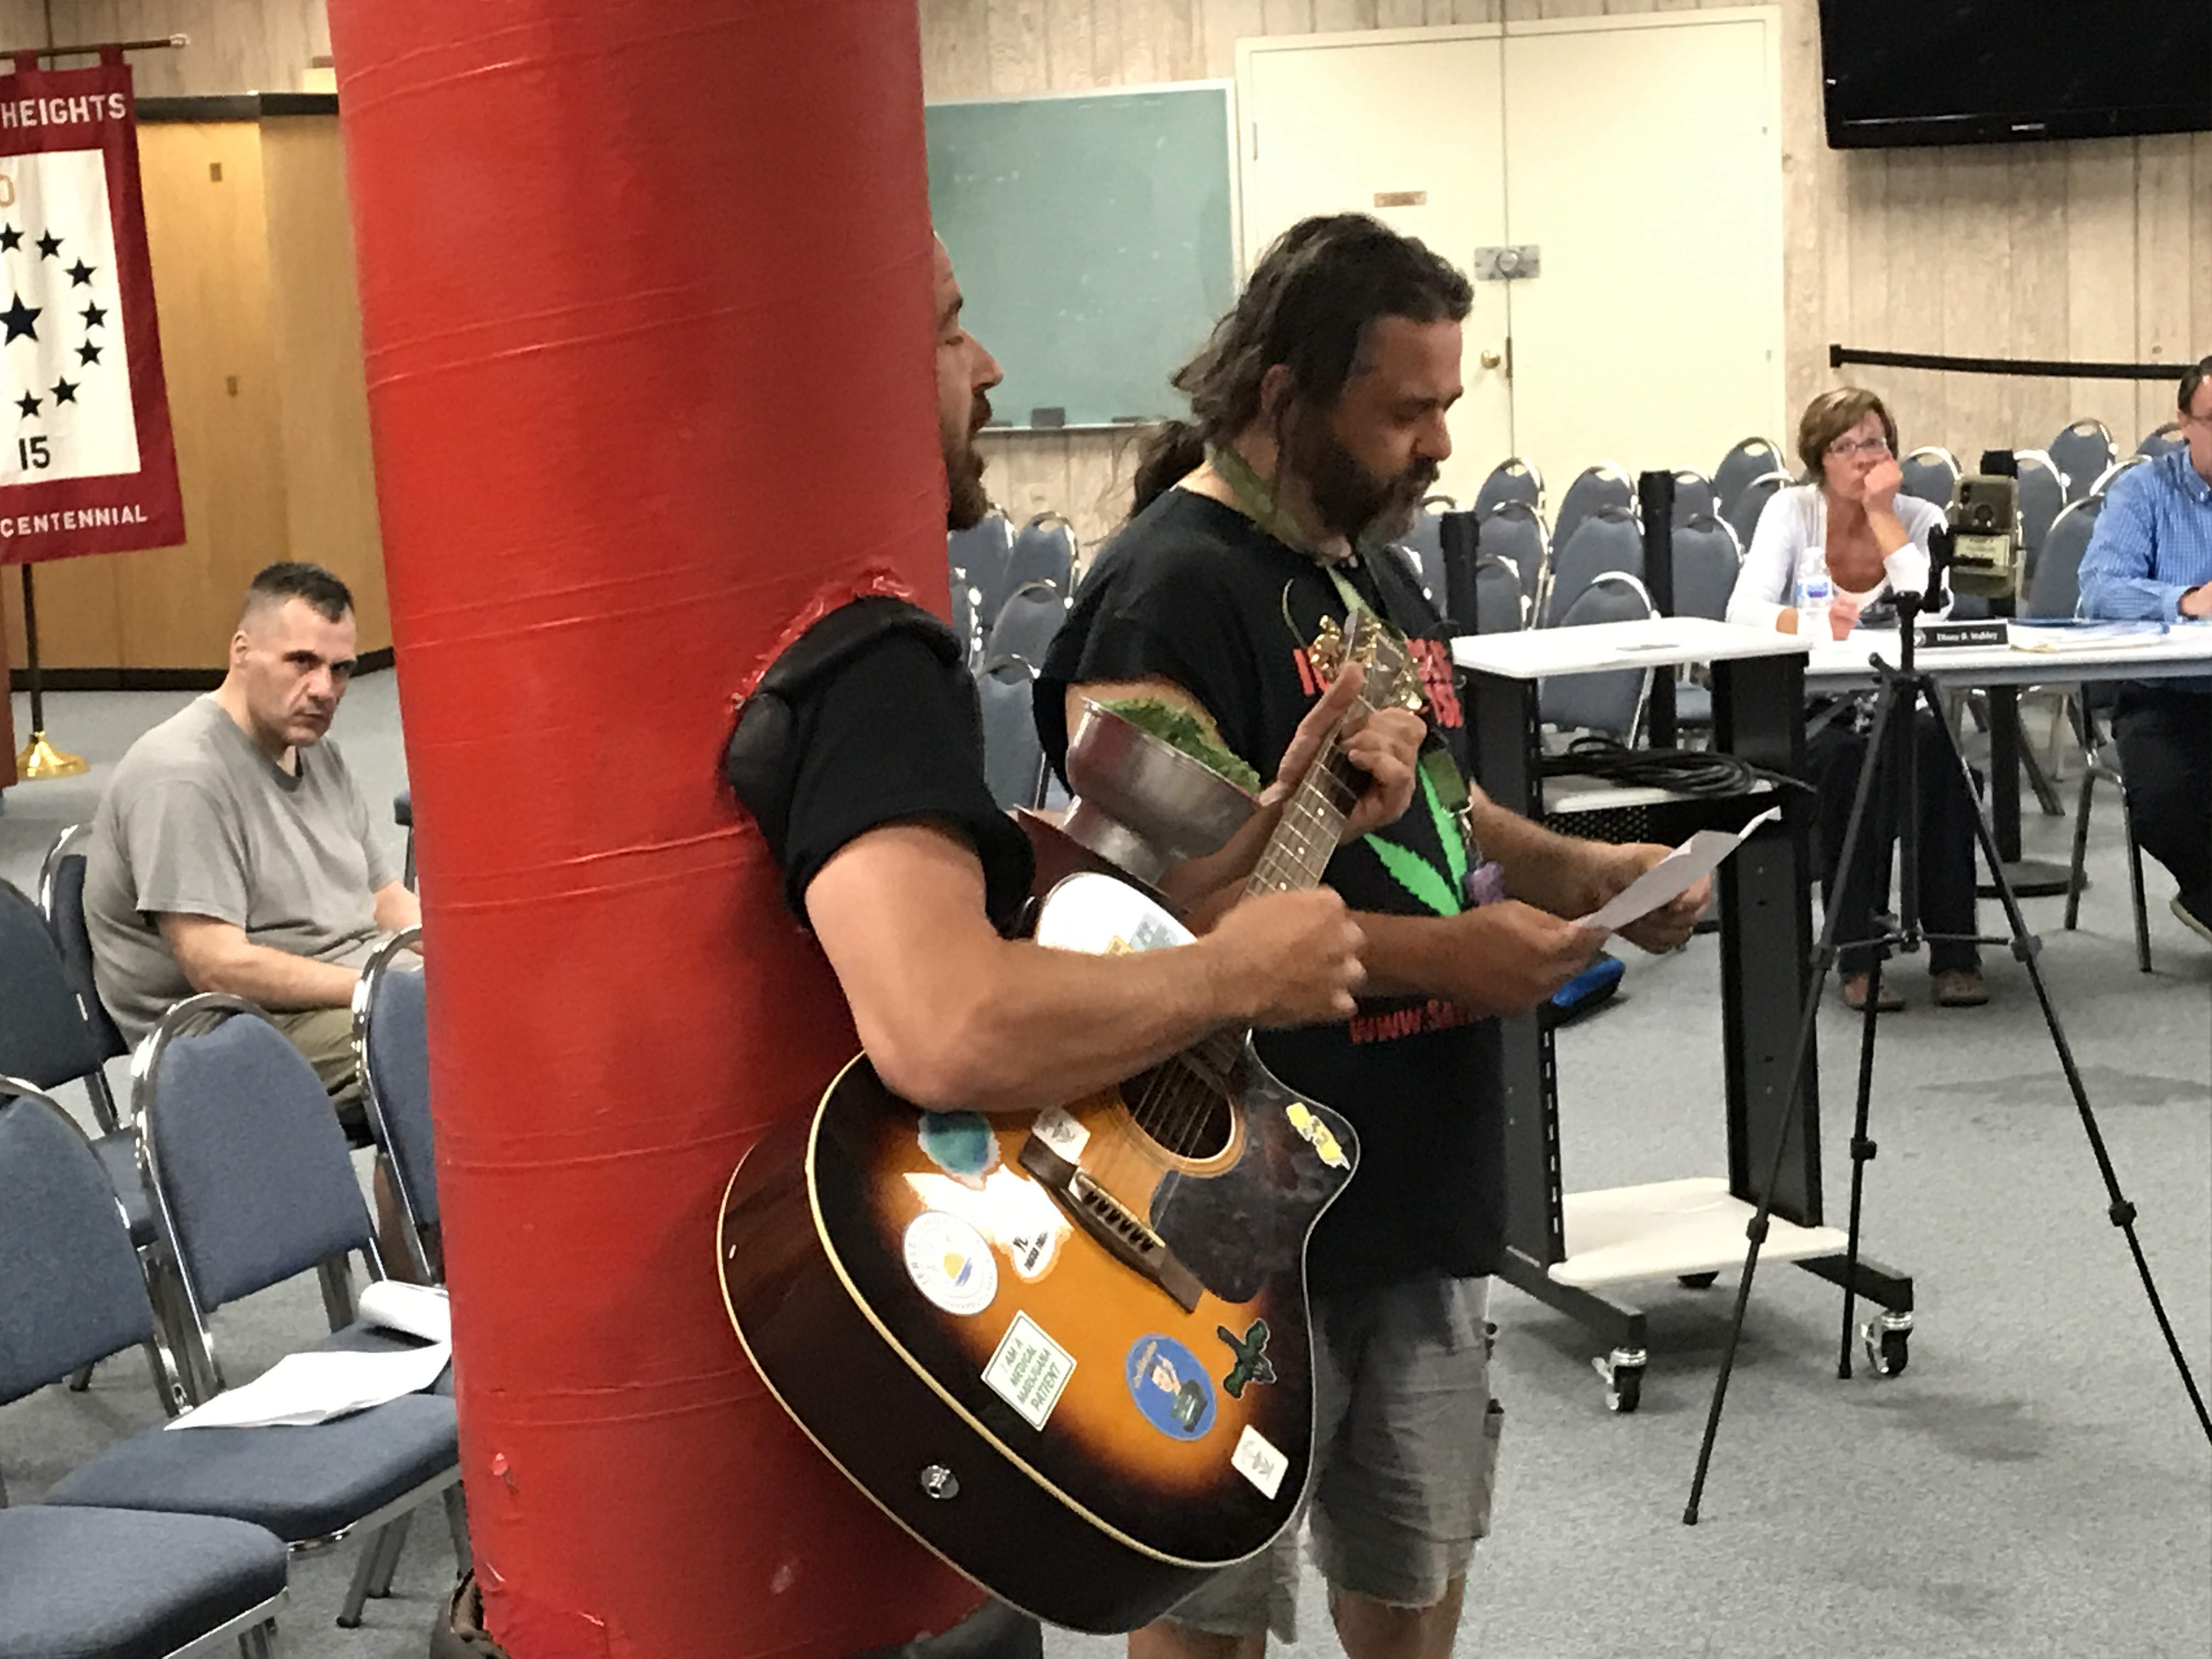 Edward 'Lefty' Grimes and a friend perform 'You Can't Get No Weed Here' in front of the Seaside Heights borough council, June 5, 2019. (Photo: Daniel Nee)